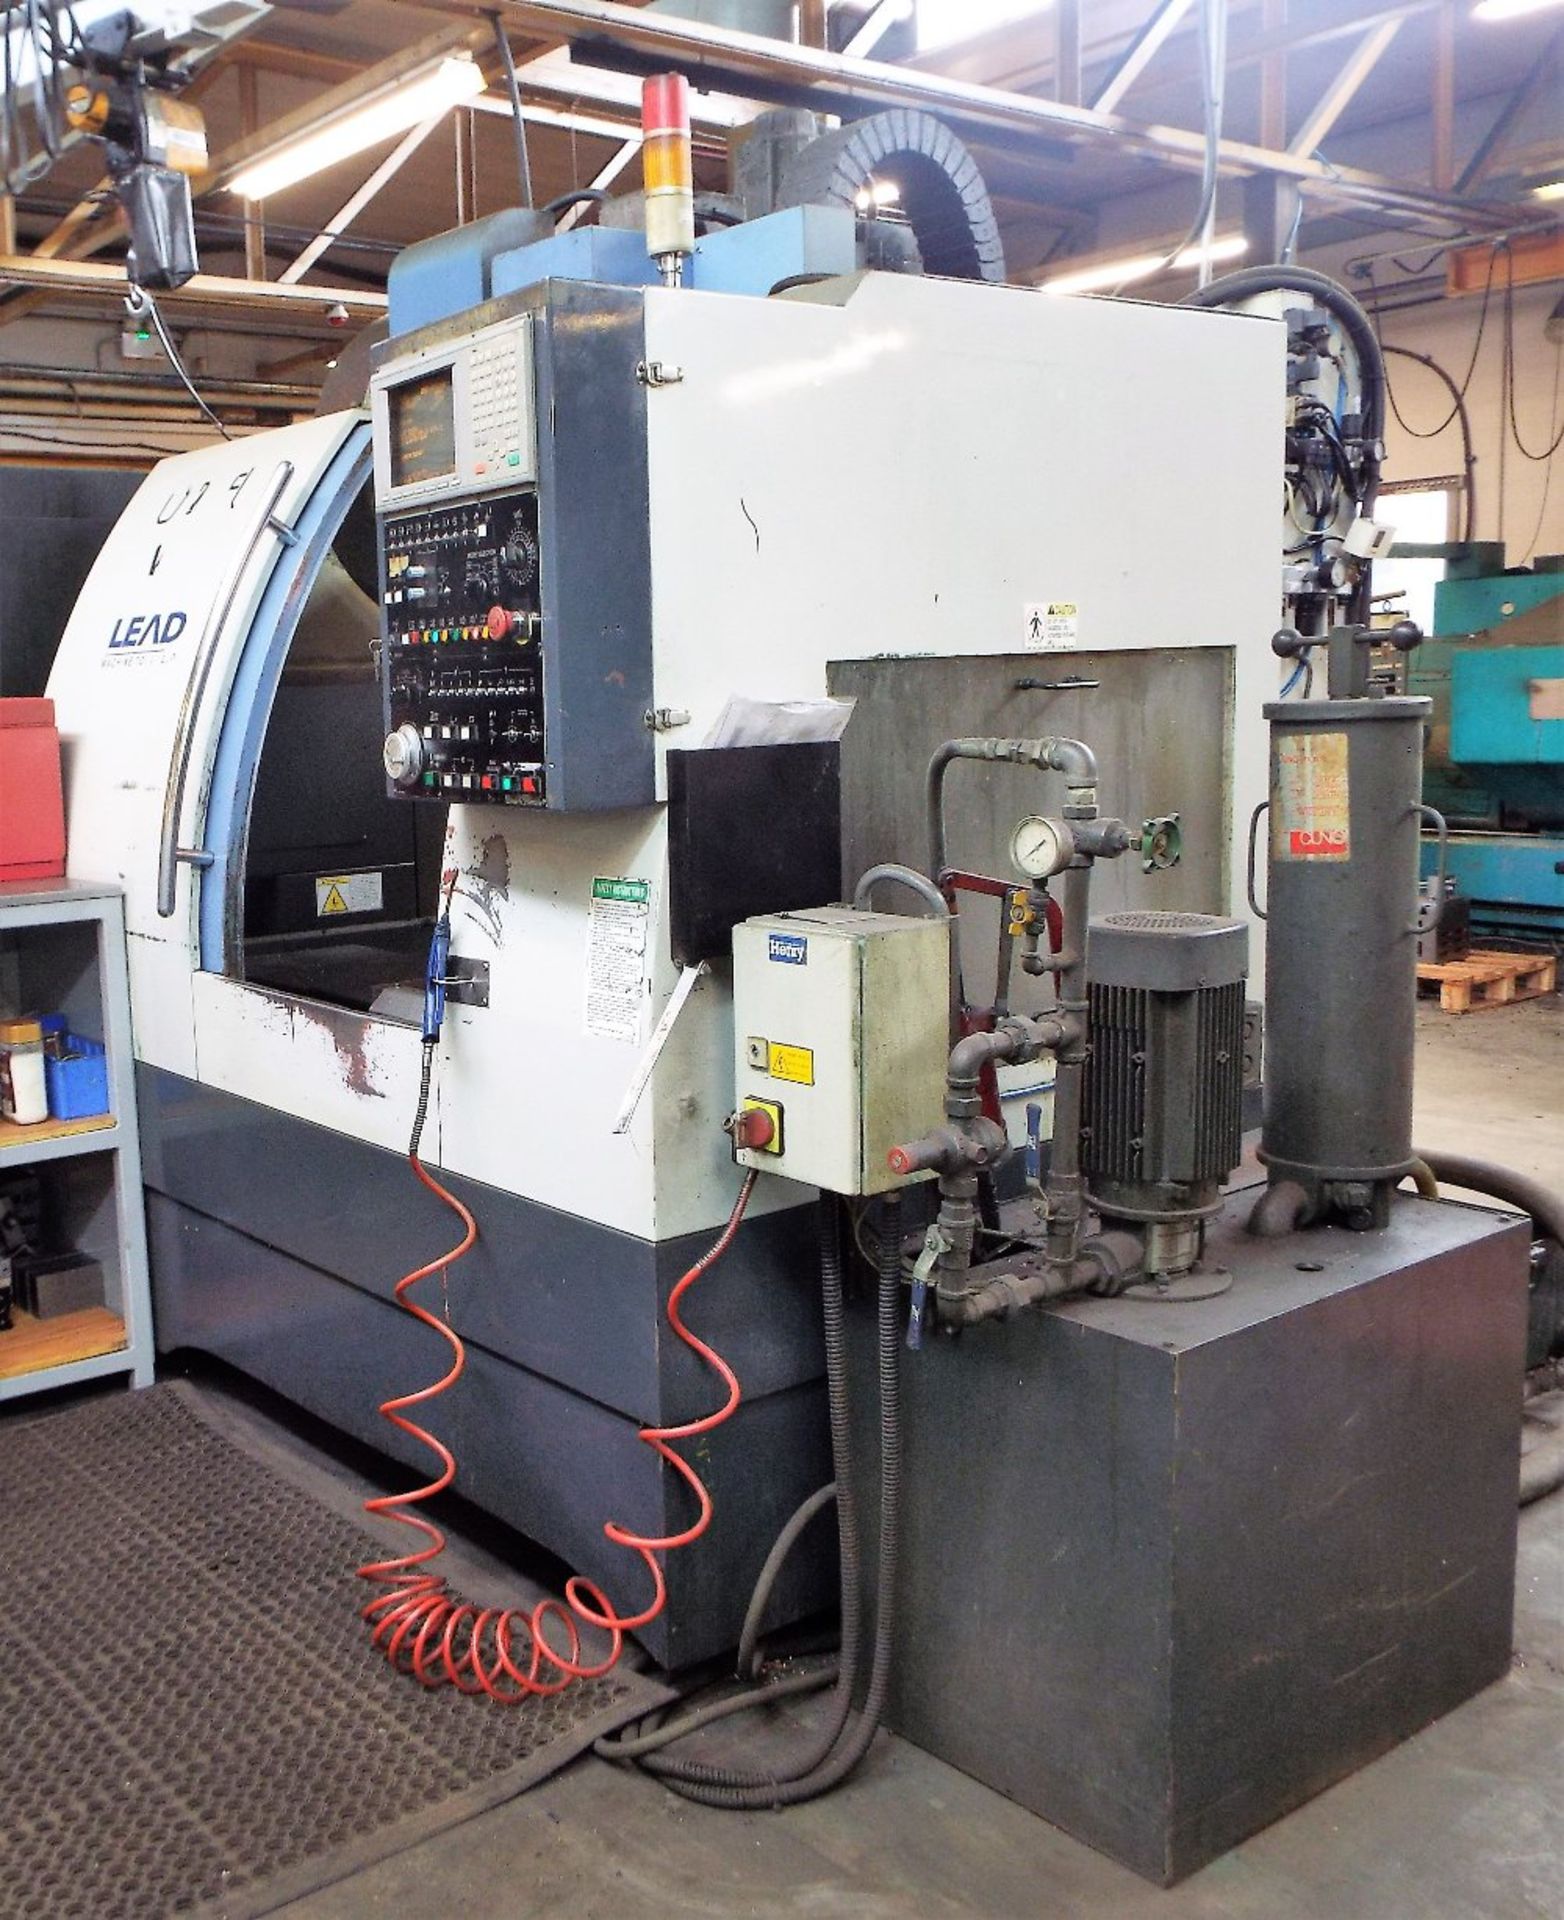 Leadwell V30 Vertical Machining Centre.